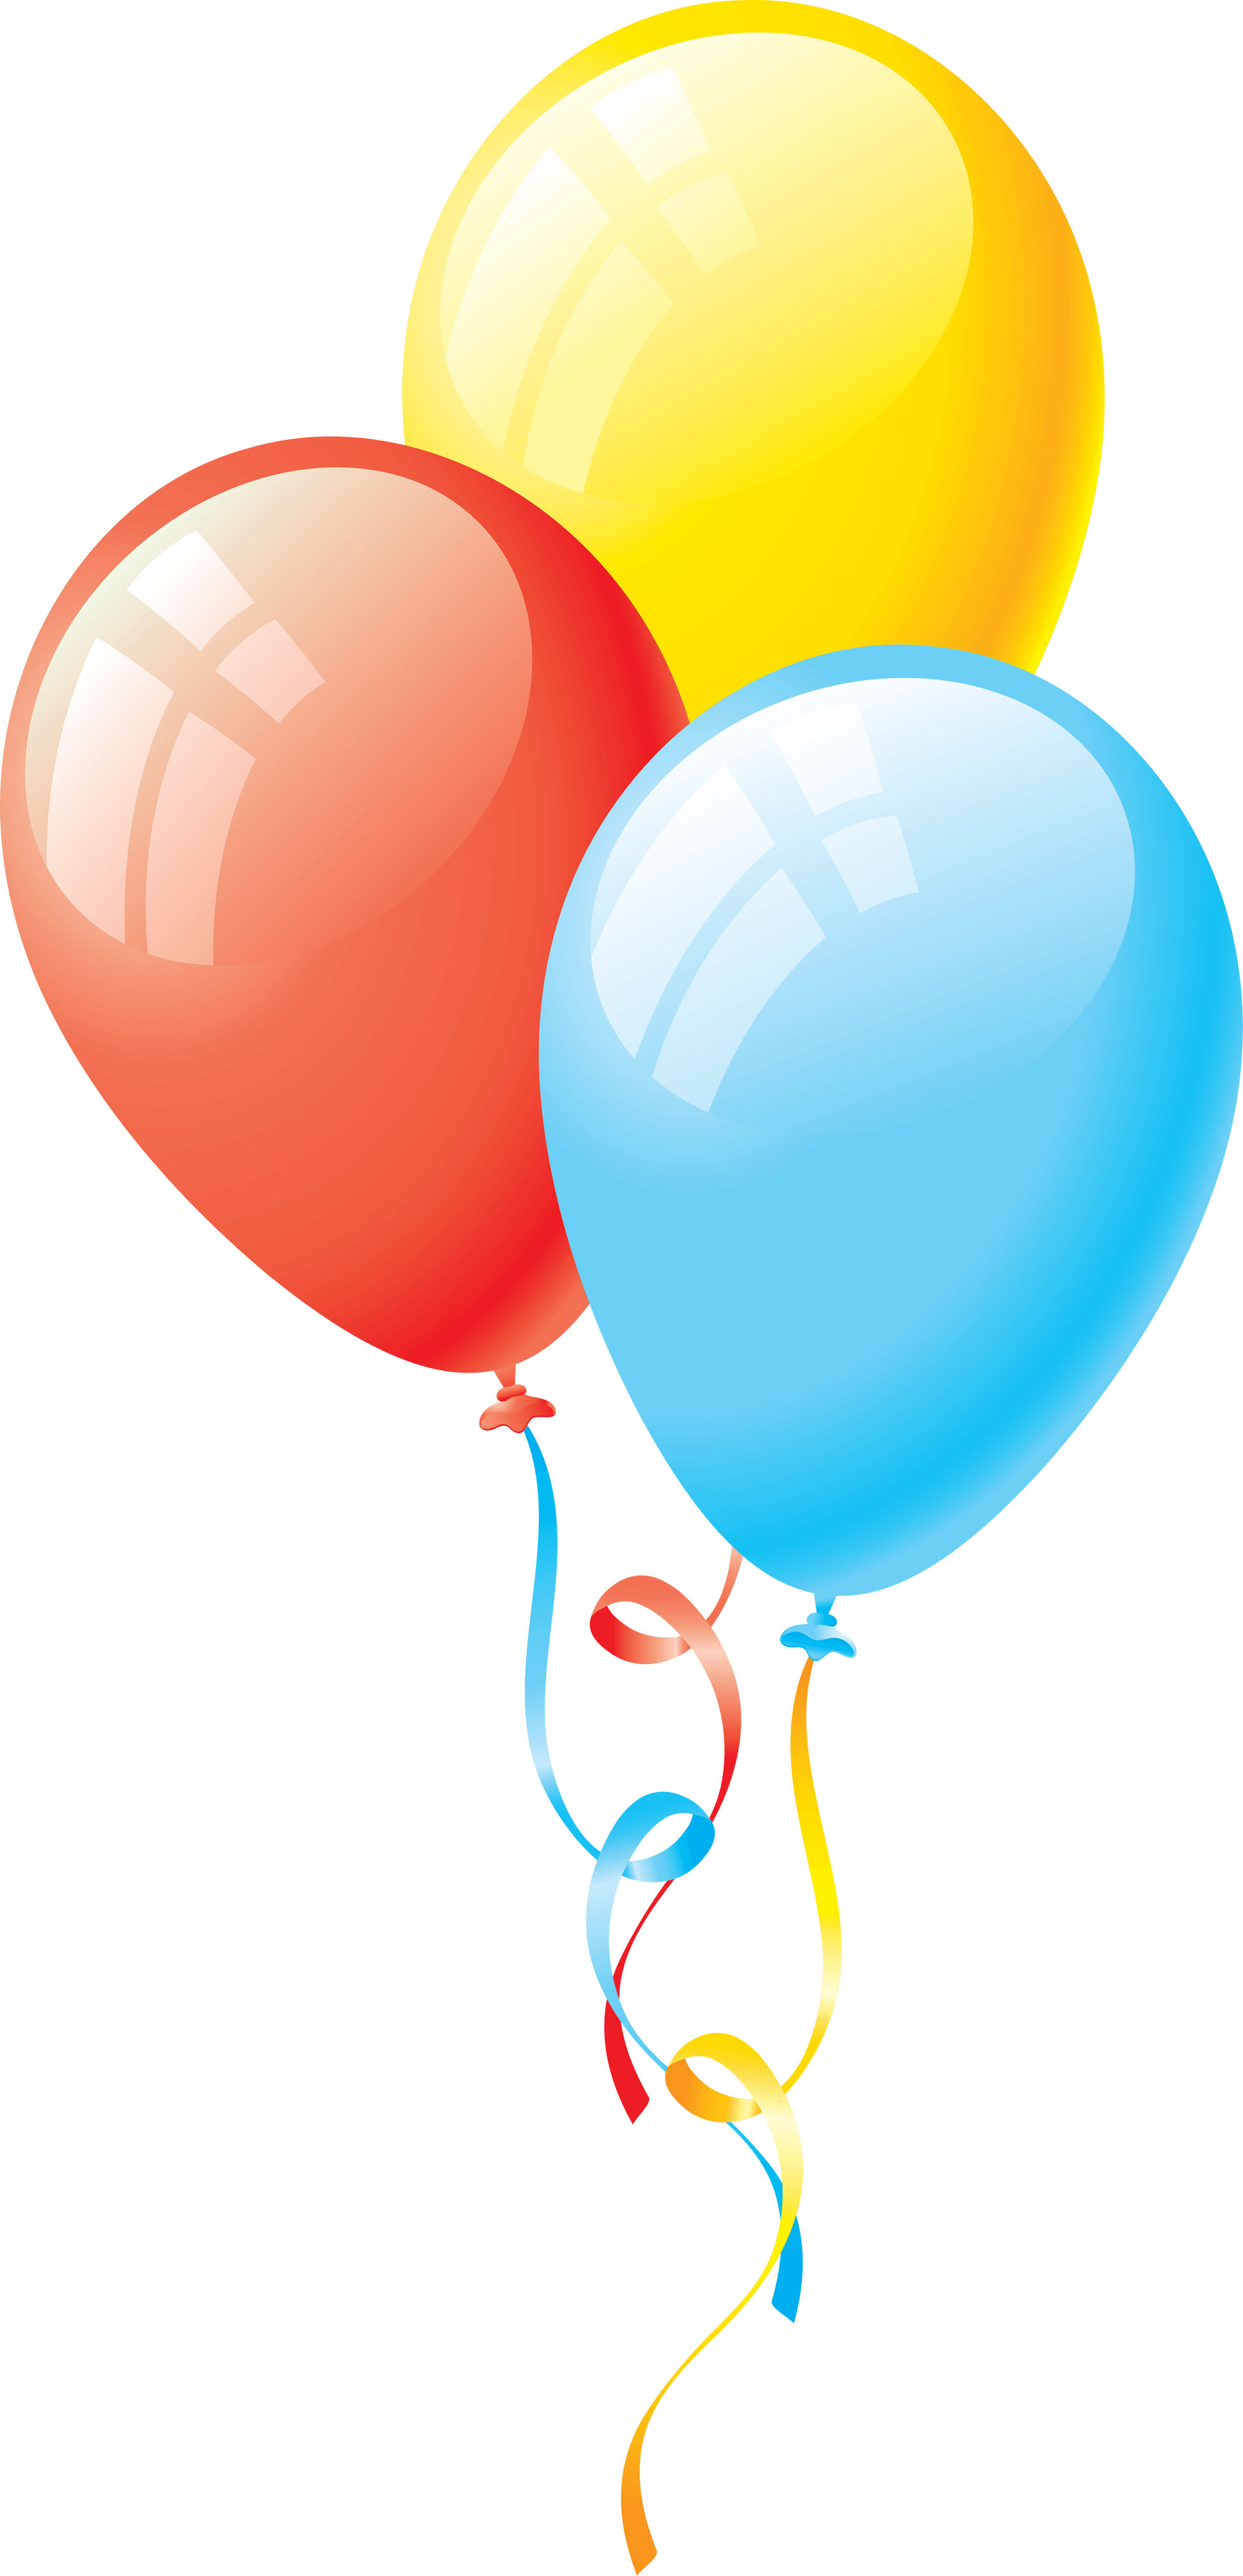 Download Colorful Balloon Png Image Download Balloons HQ PNG Image ...